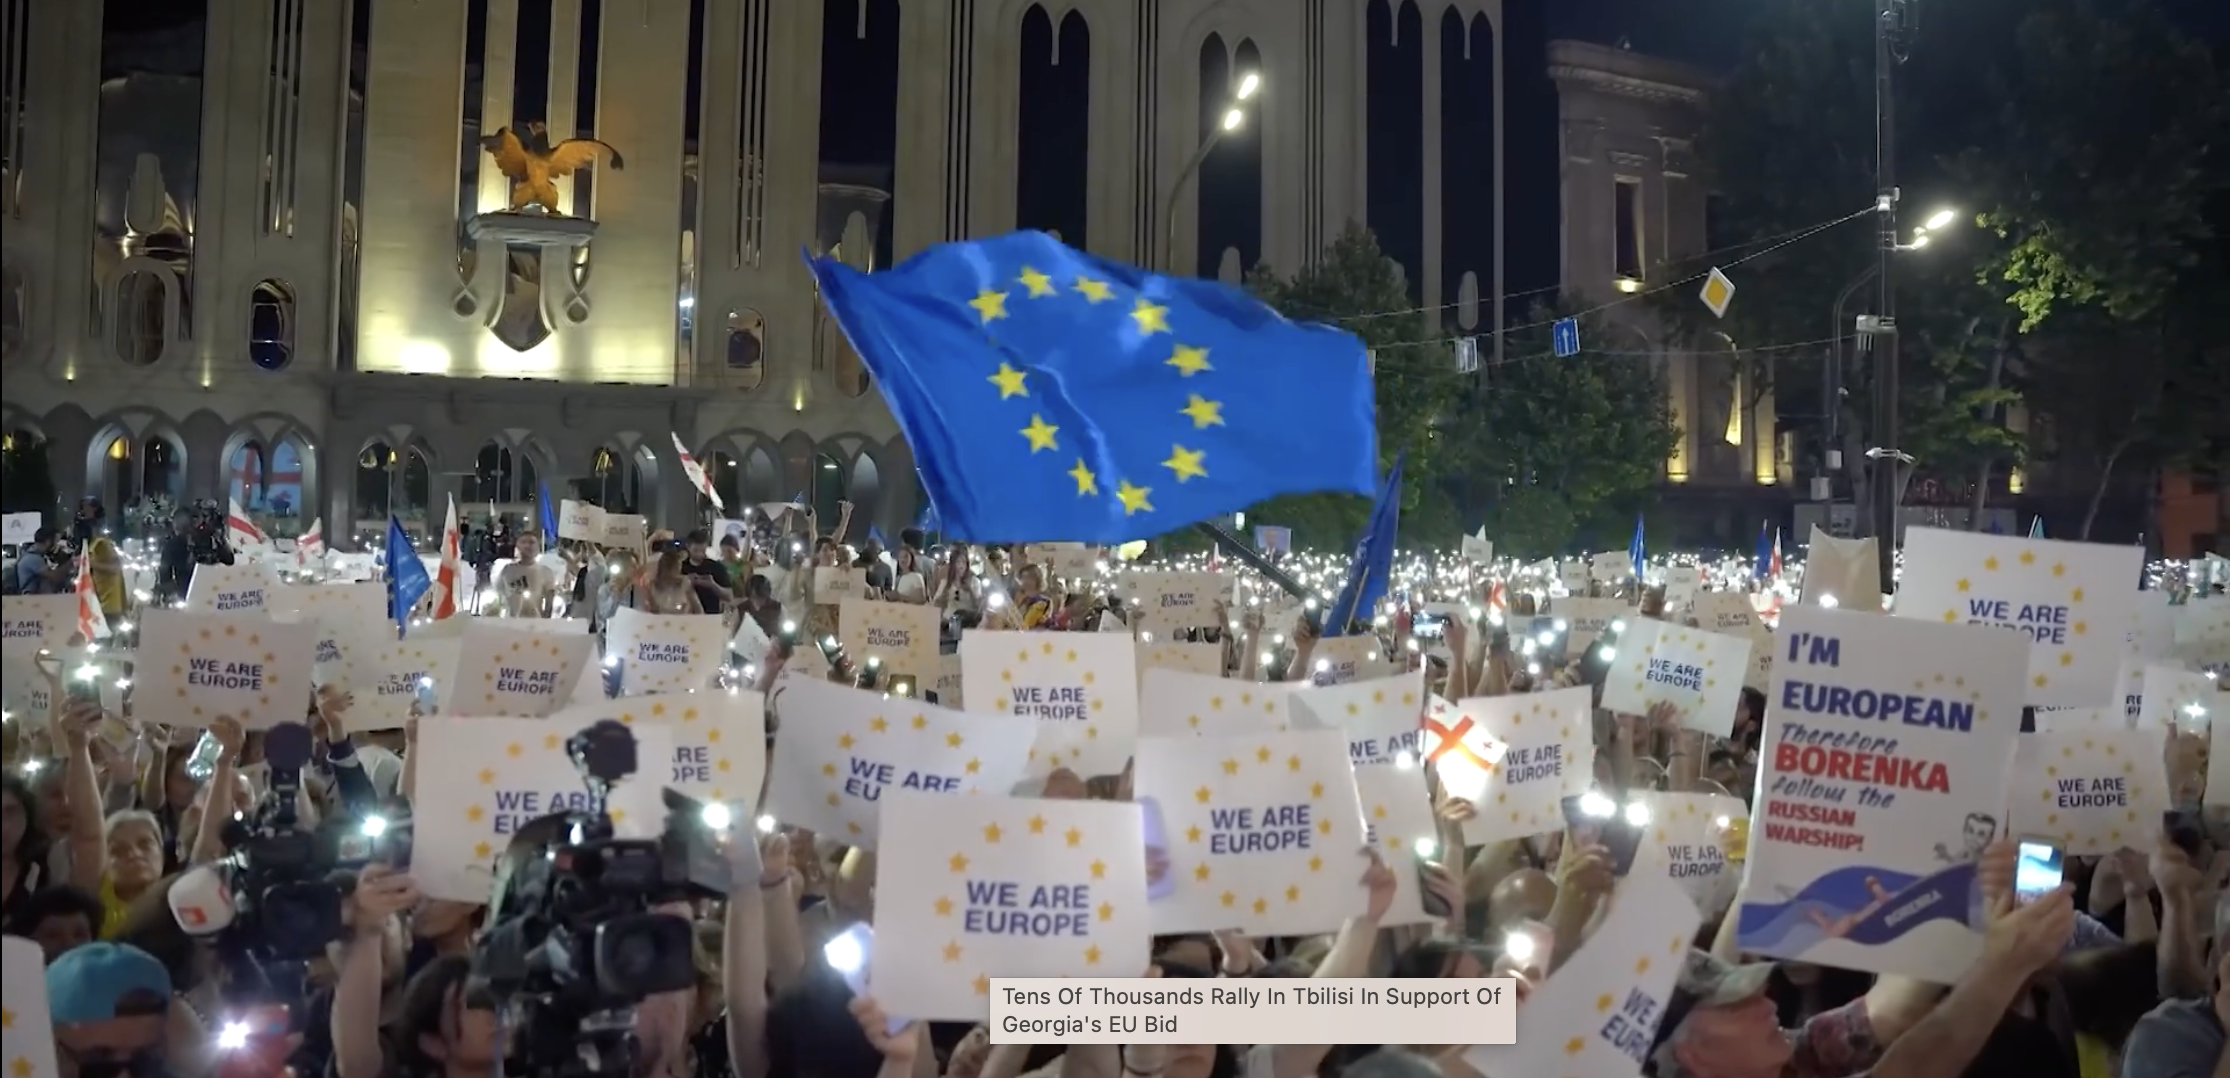 In Tbilisi, thousands attend the ‘march for Europe’ to support Georgia's EU bid